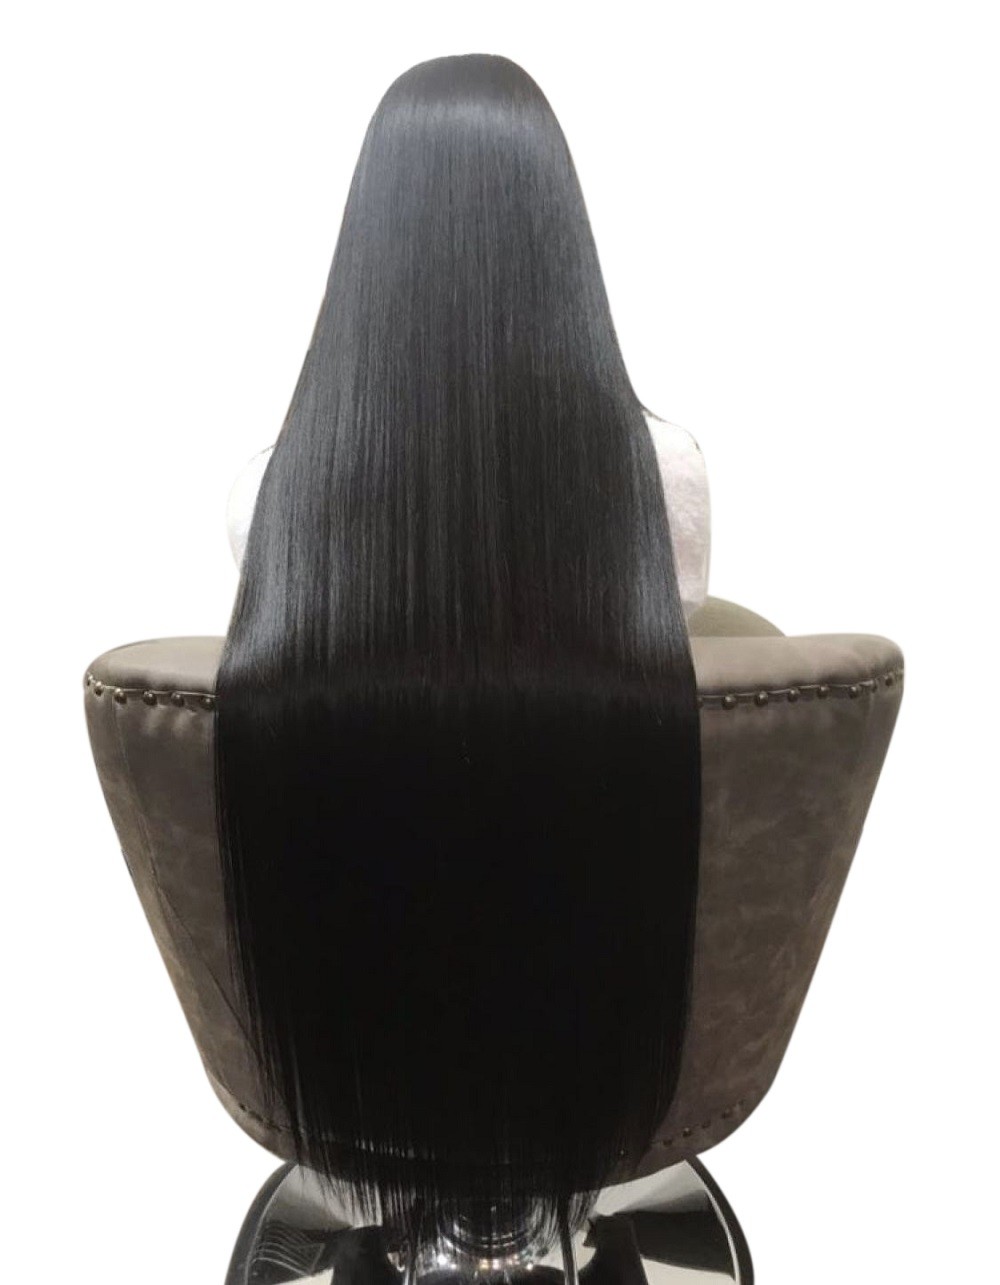 490g Lace Front Human Hair Wigs